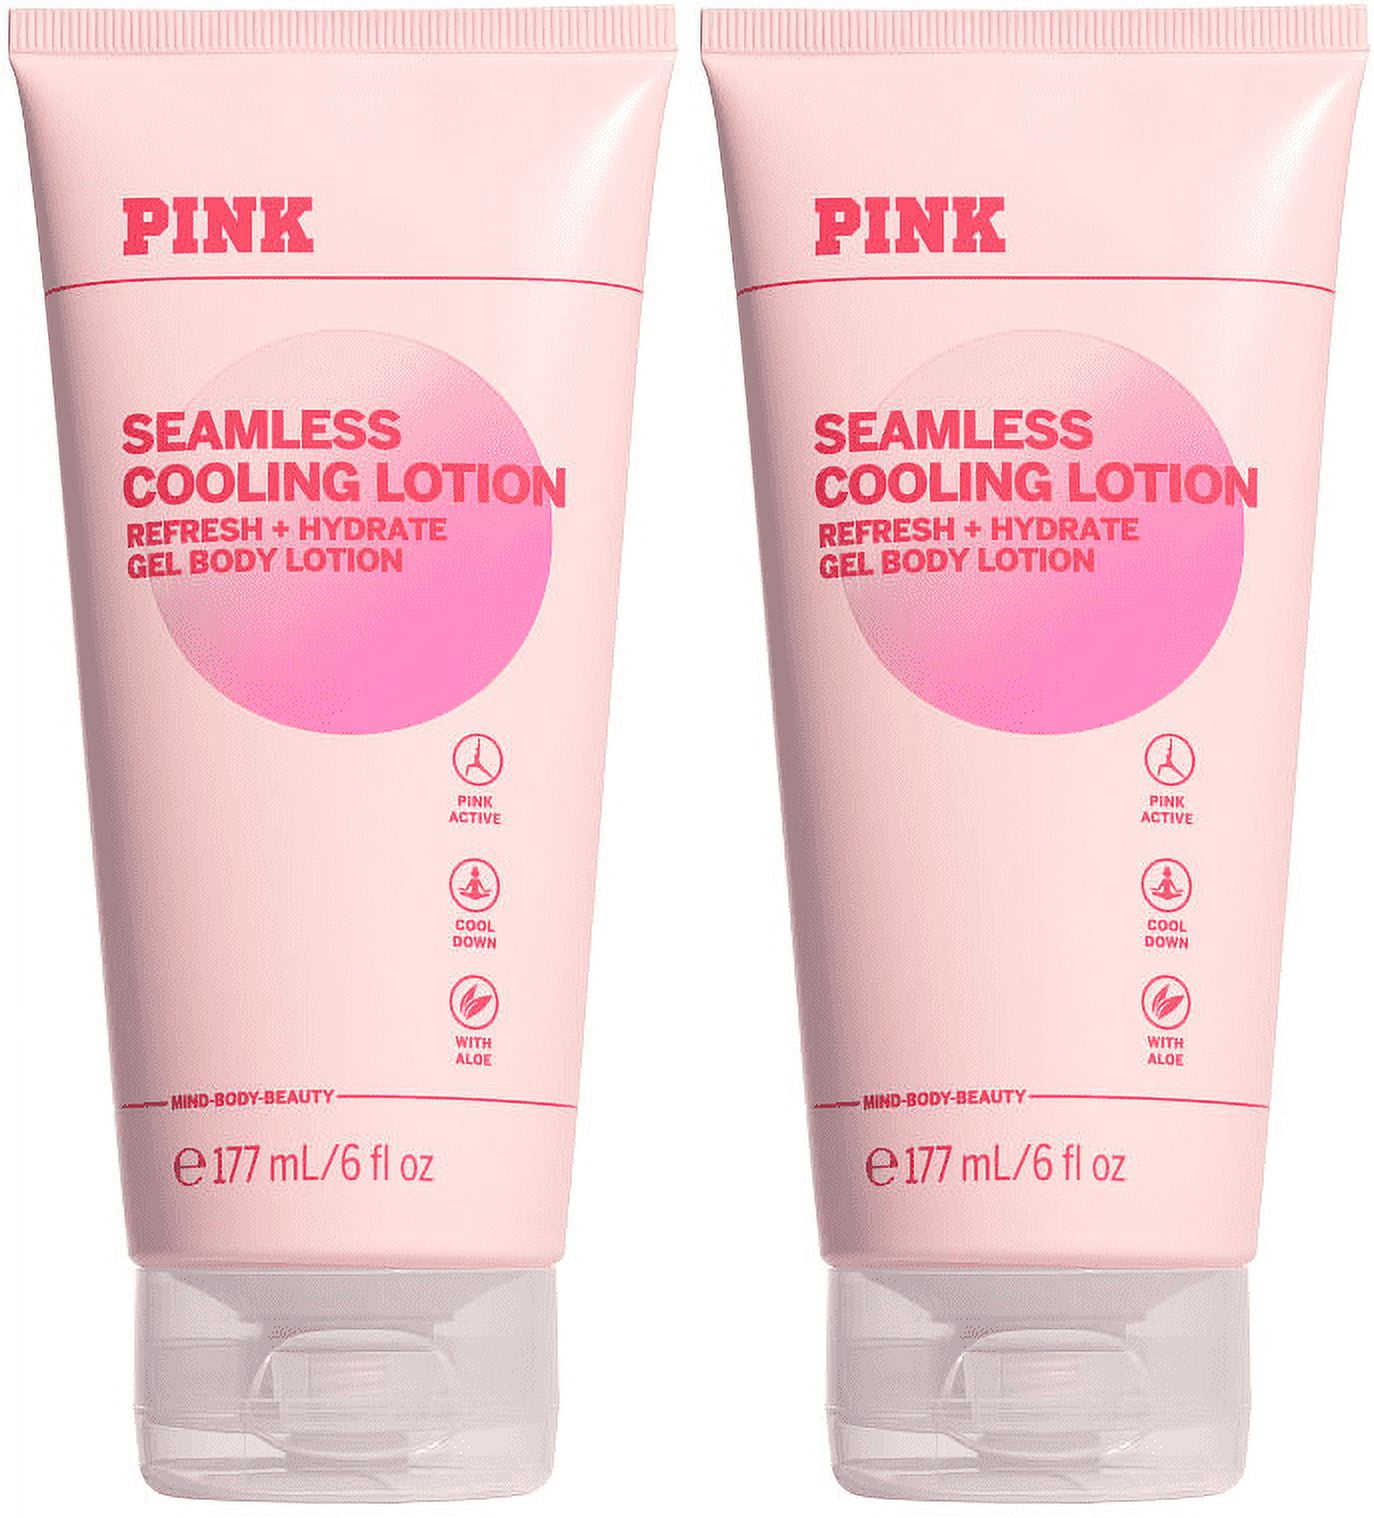 Victoria's Secret/PINK Seamless Cooling Lotion with Aloe 6 fl. oz. set of 2